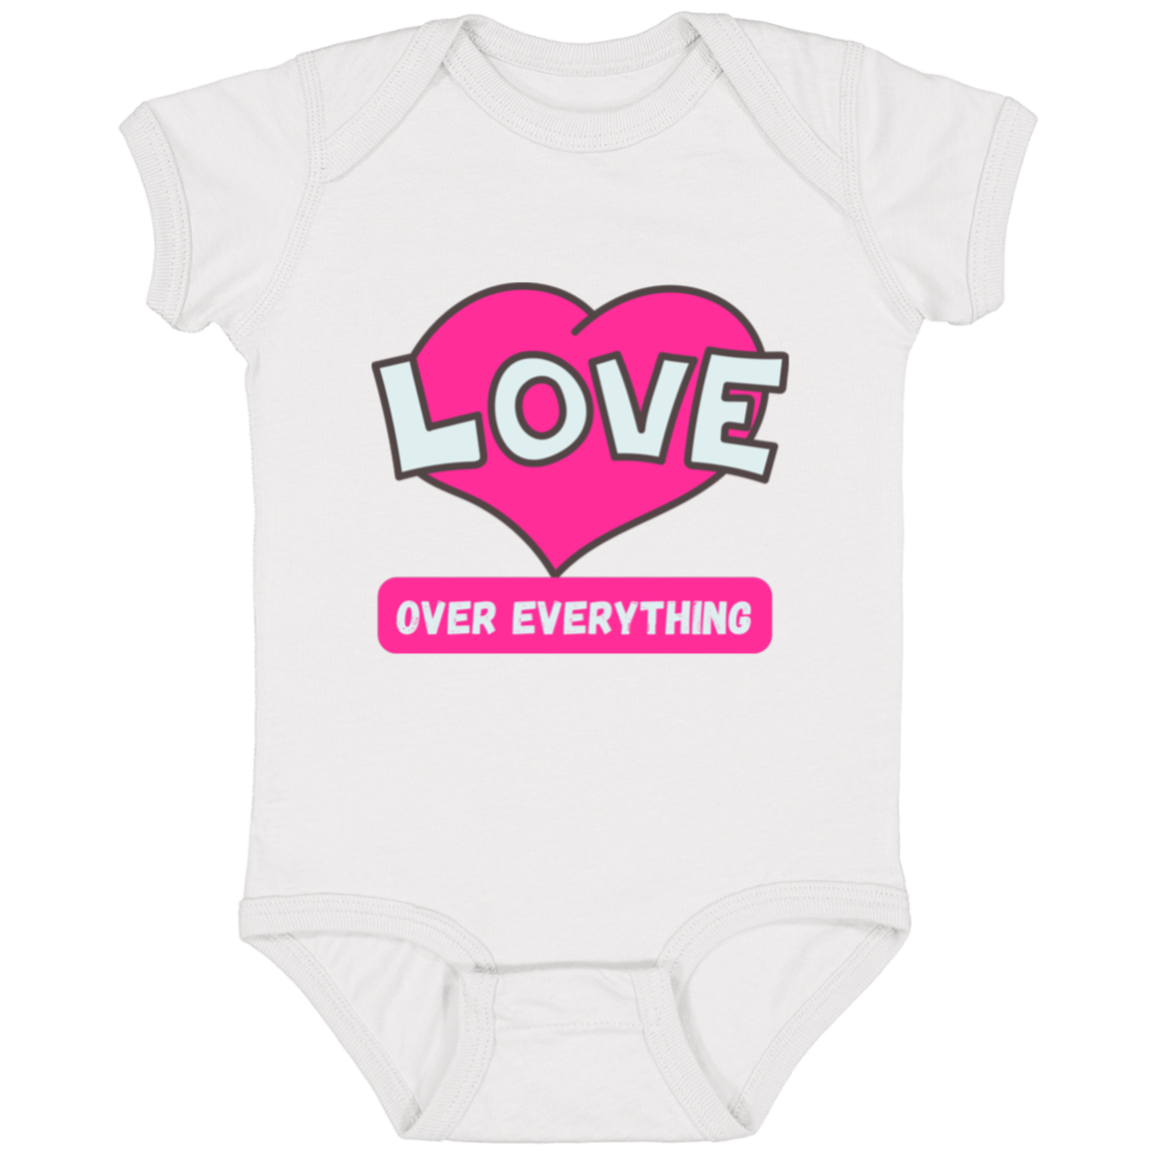 Love over everything Infant Fine Jersey Bodysuit